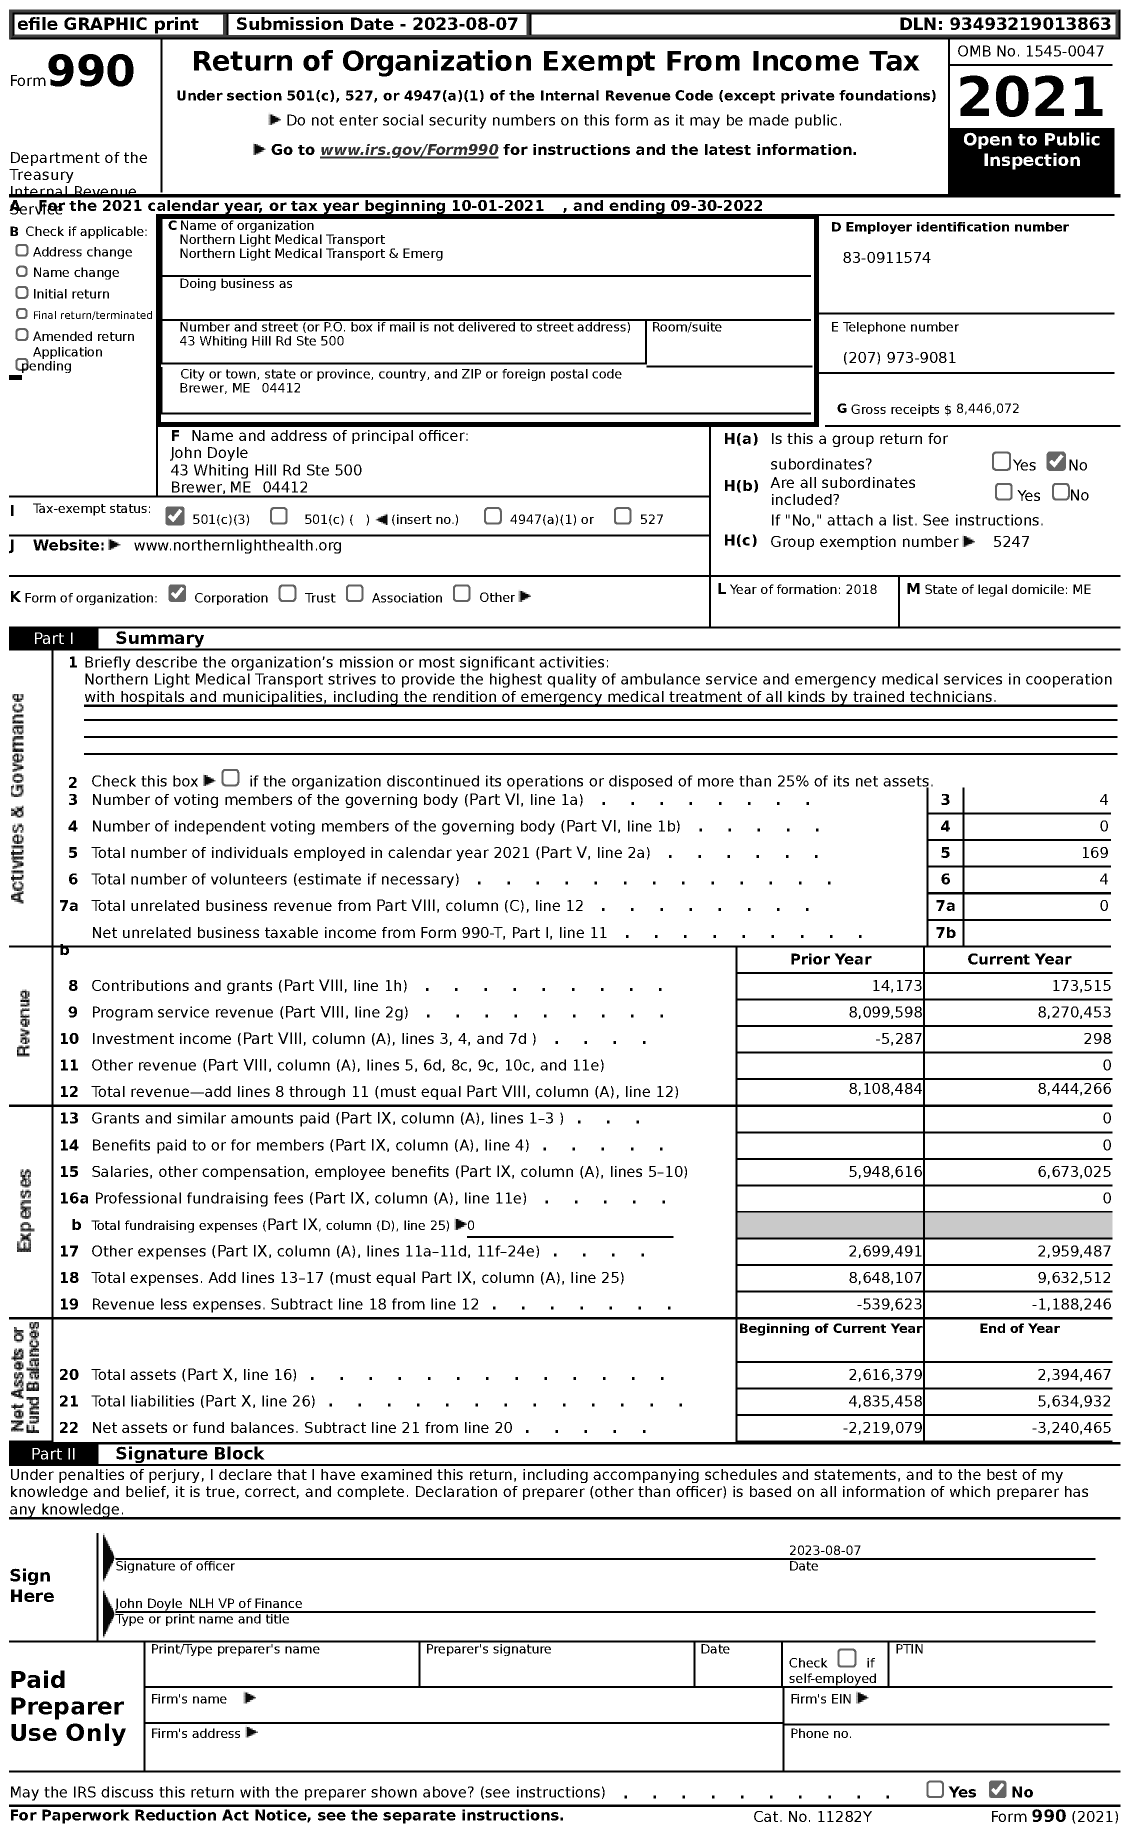 Image of first page of 2021 Form 990 for Northern Light Medical Transport Northern Light Medical Transport & Emerg